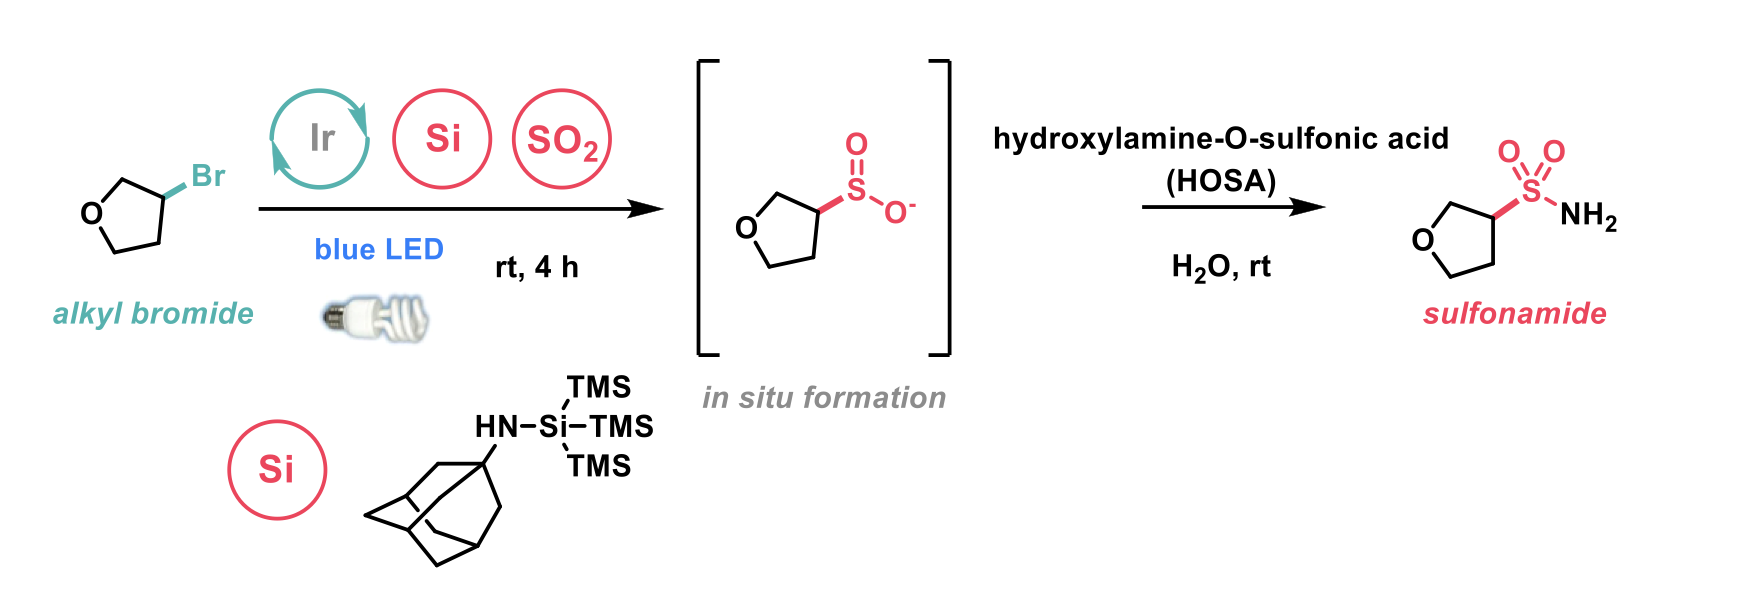 Sulfonamide formation from alkyl bromides